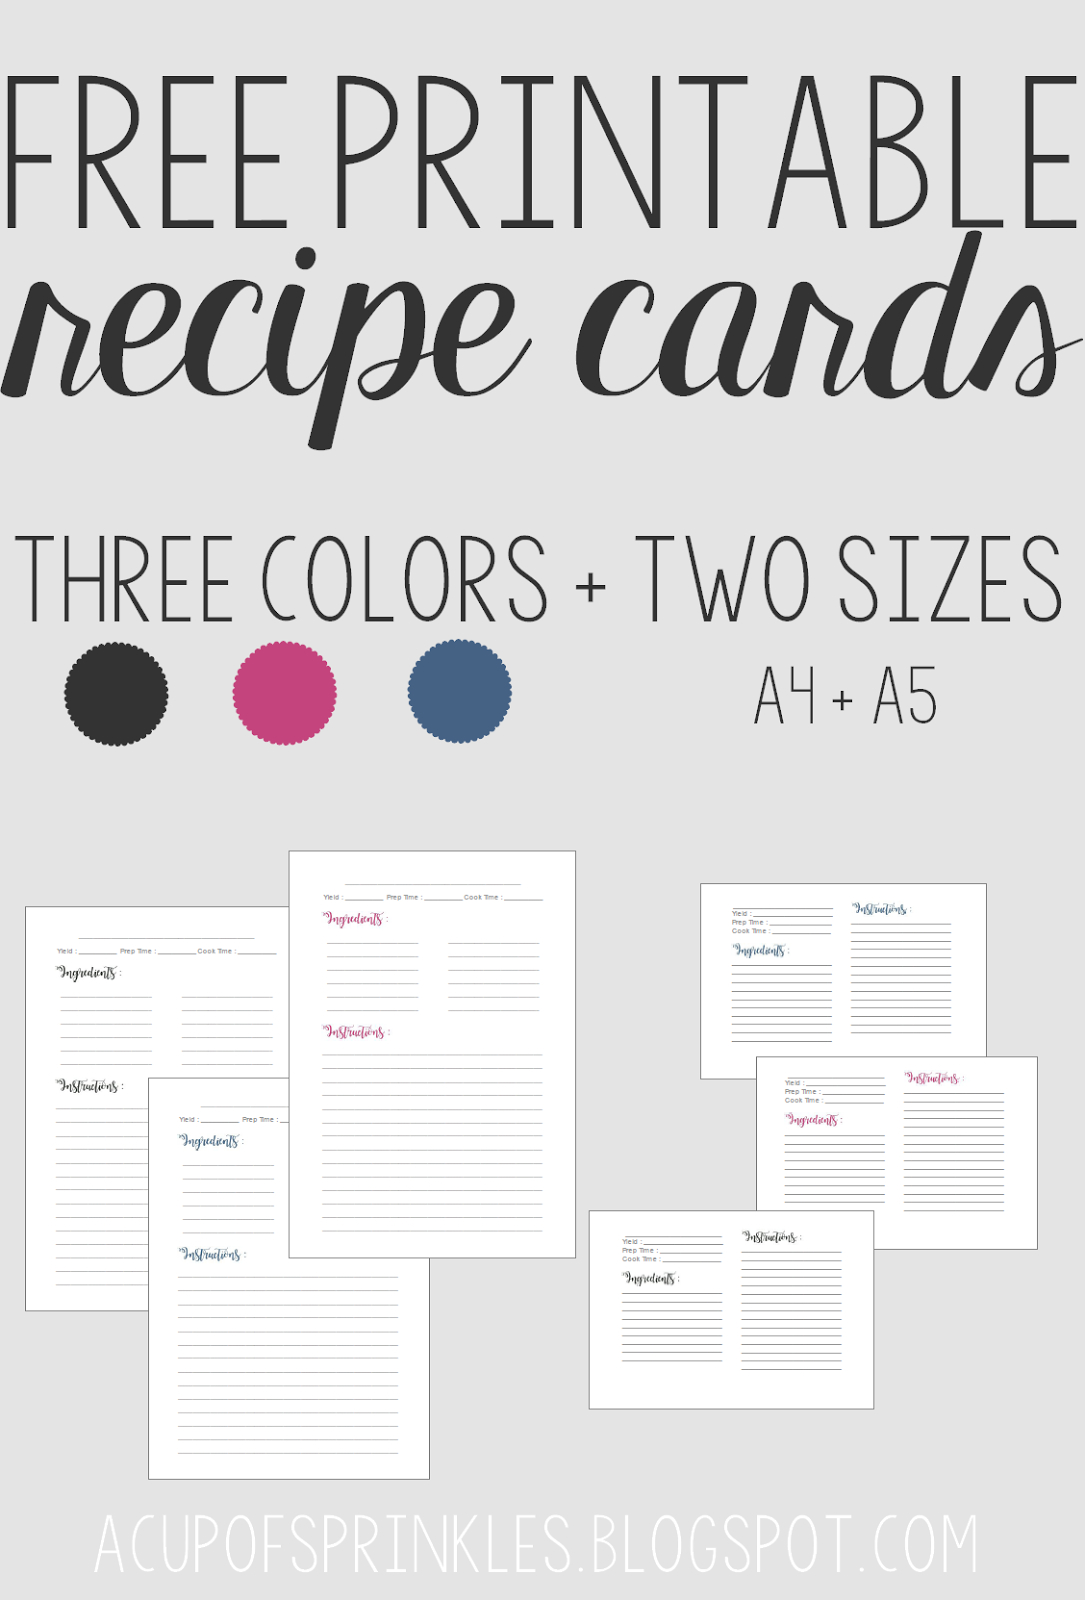 Free Printable : Recipe Cards | A Cup Of Sprinkles | Recipes From A - Free Printable Recipes